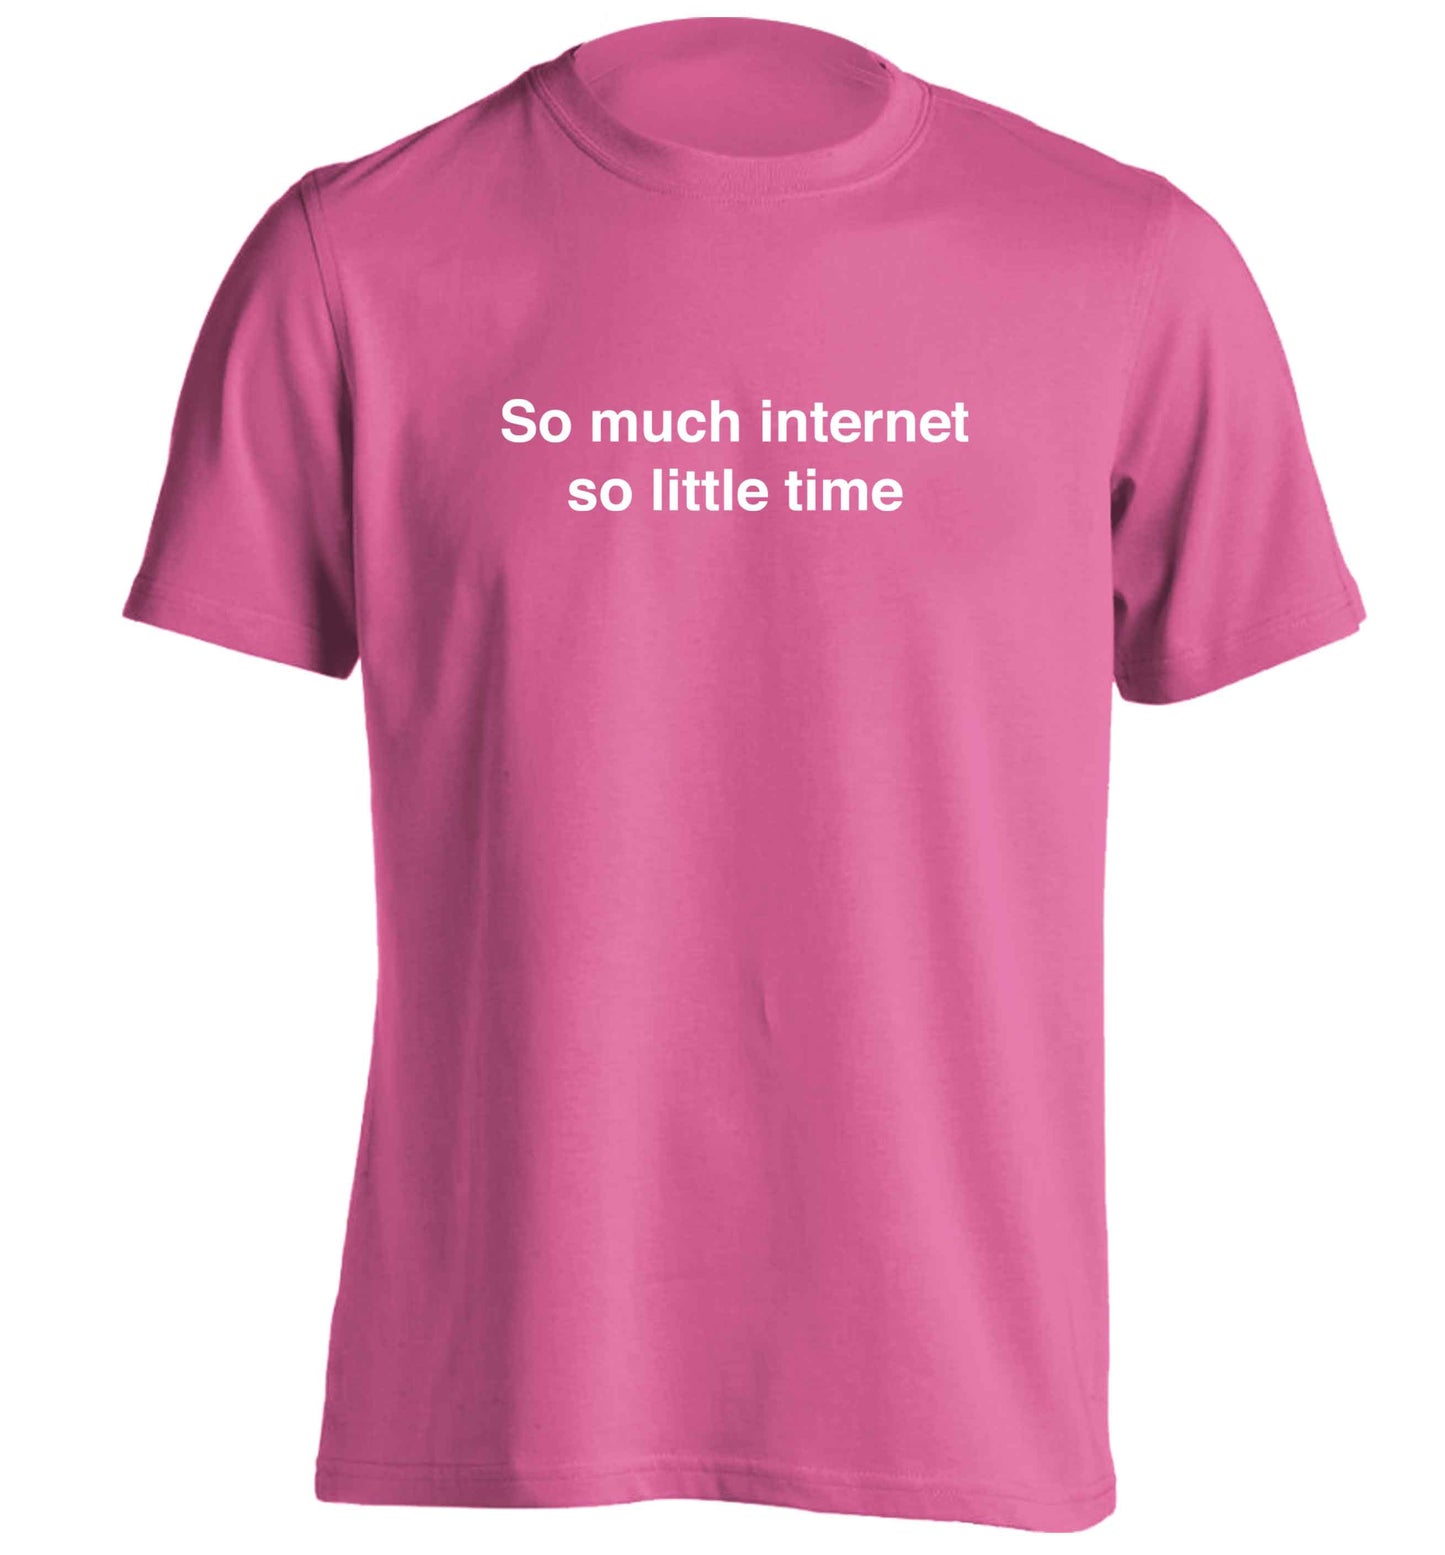 So much internet so little time adults unisex pink Tshirt 2XL